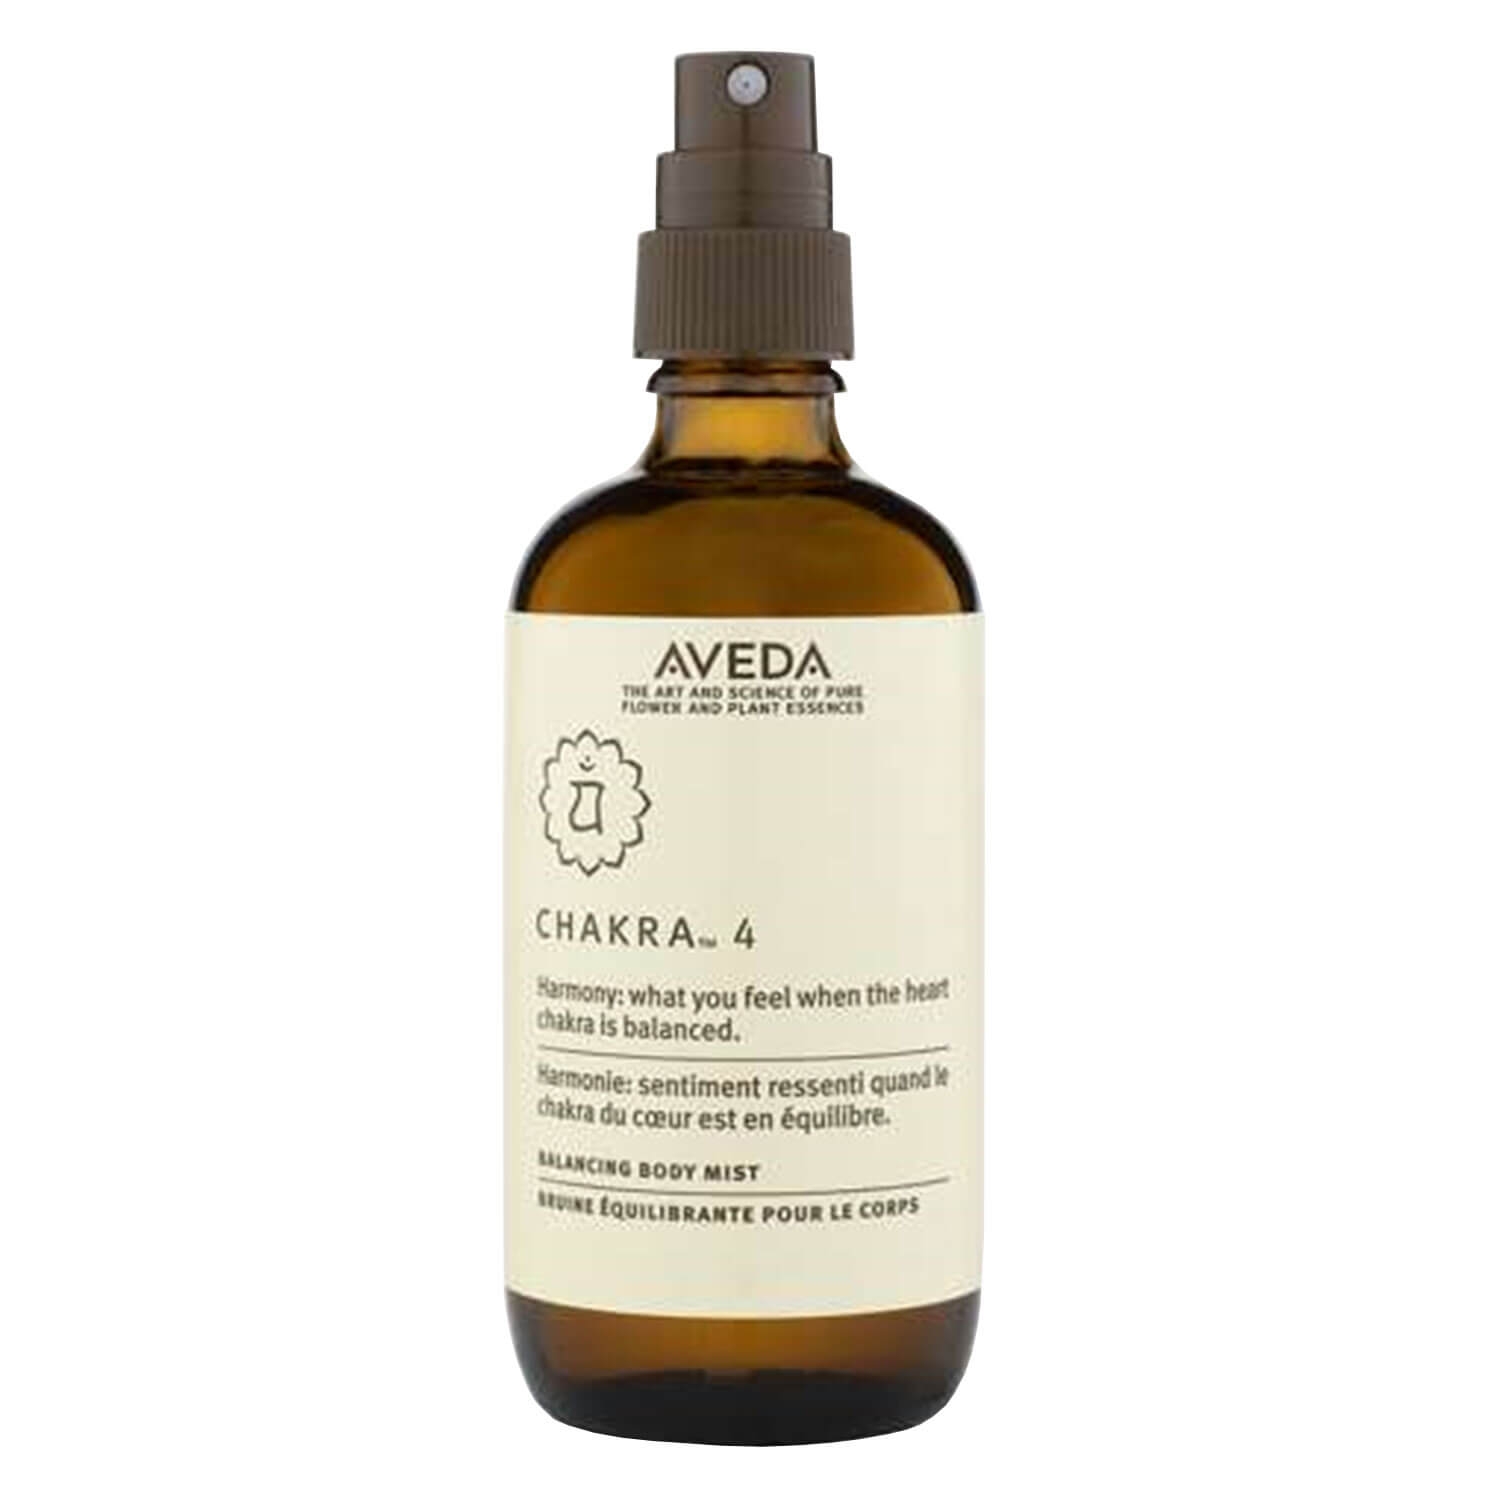 Product image from chakra - 4 balancing pure-fume mist feel in harmony